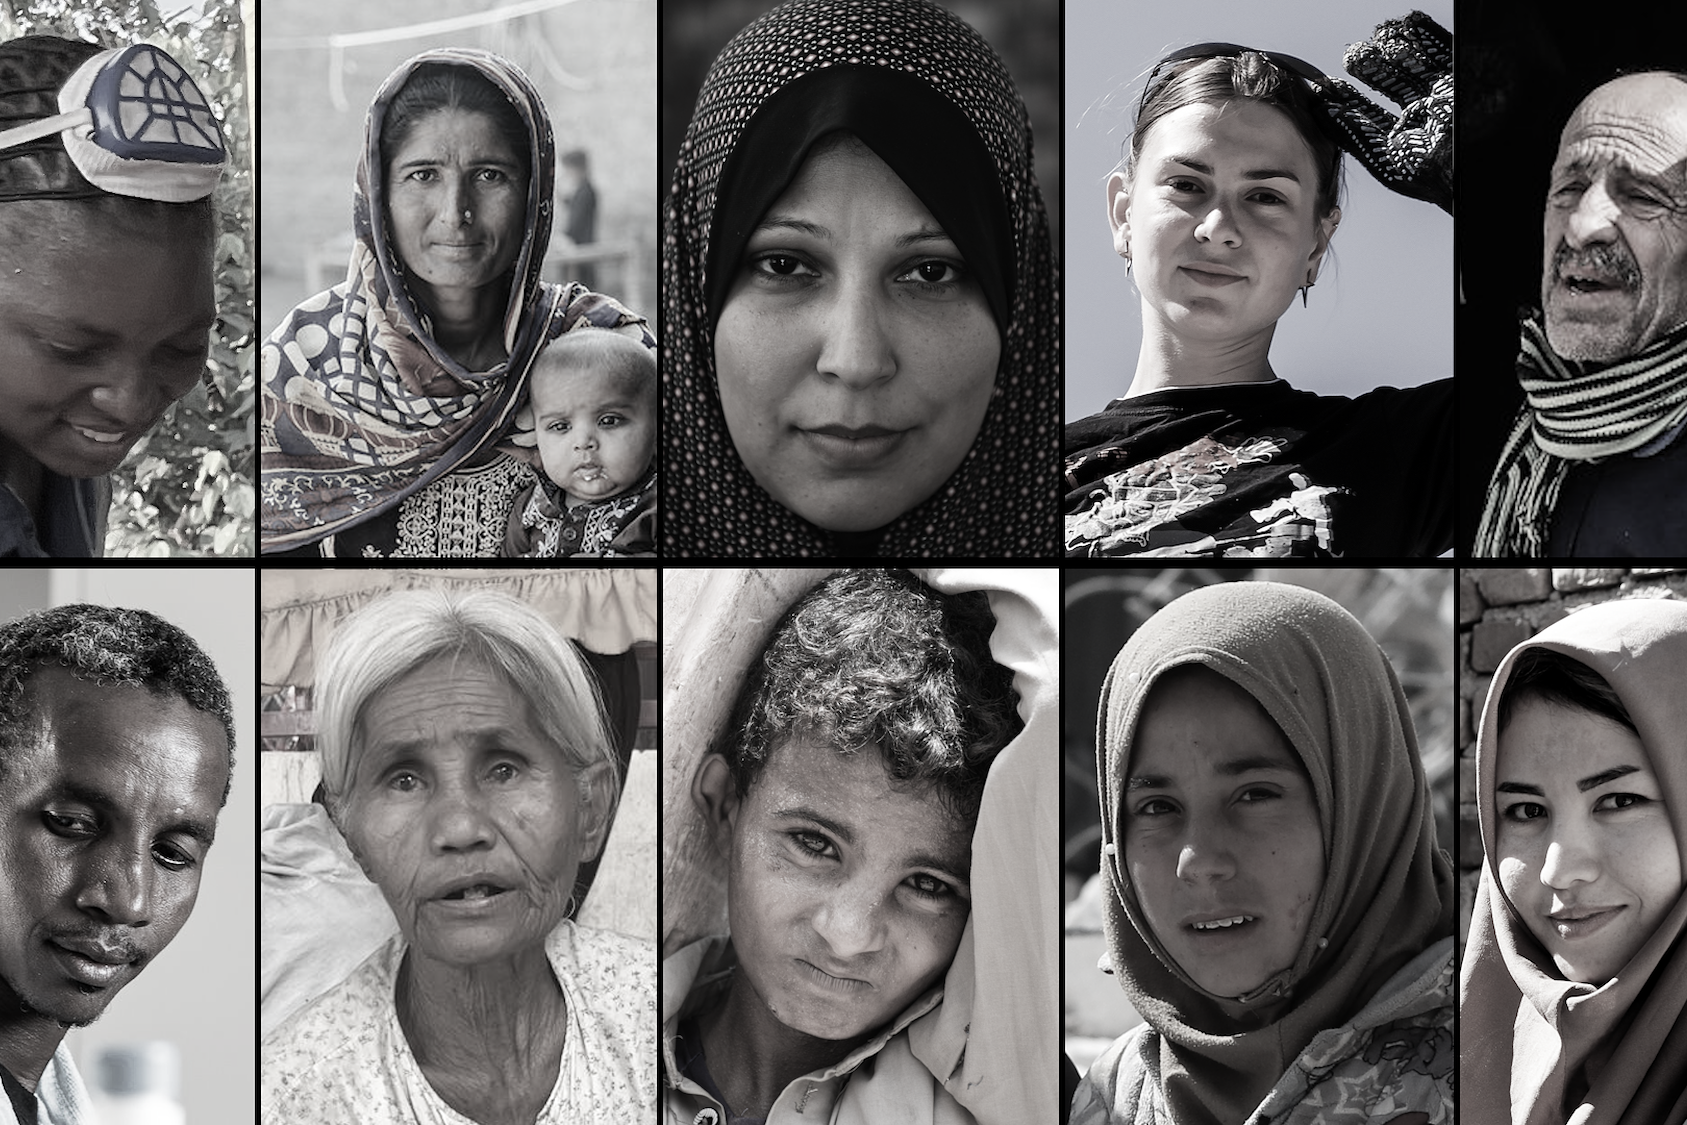 portraits from around the world of people in crises